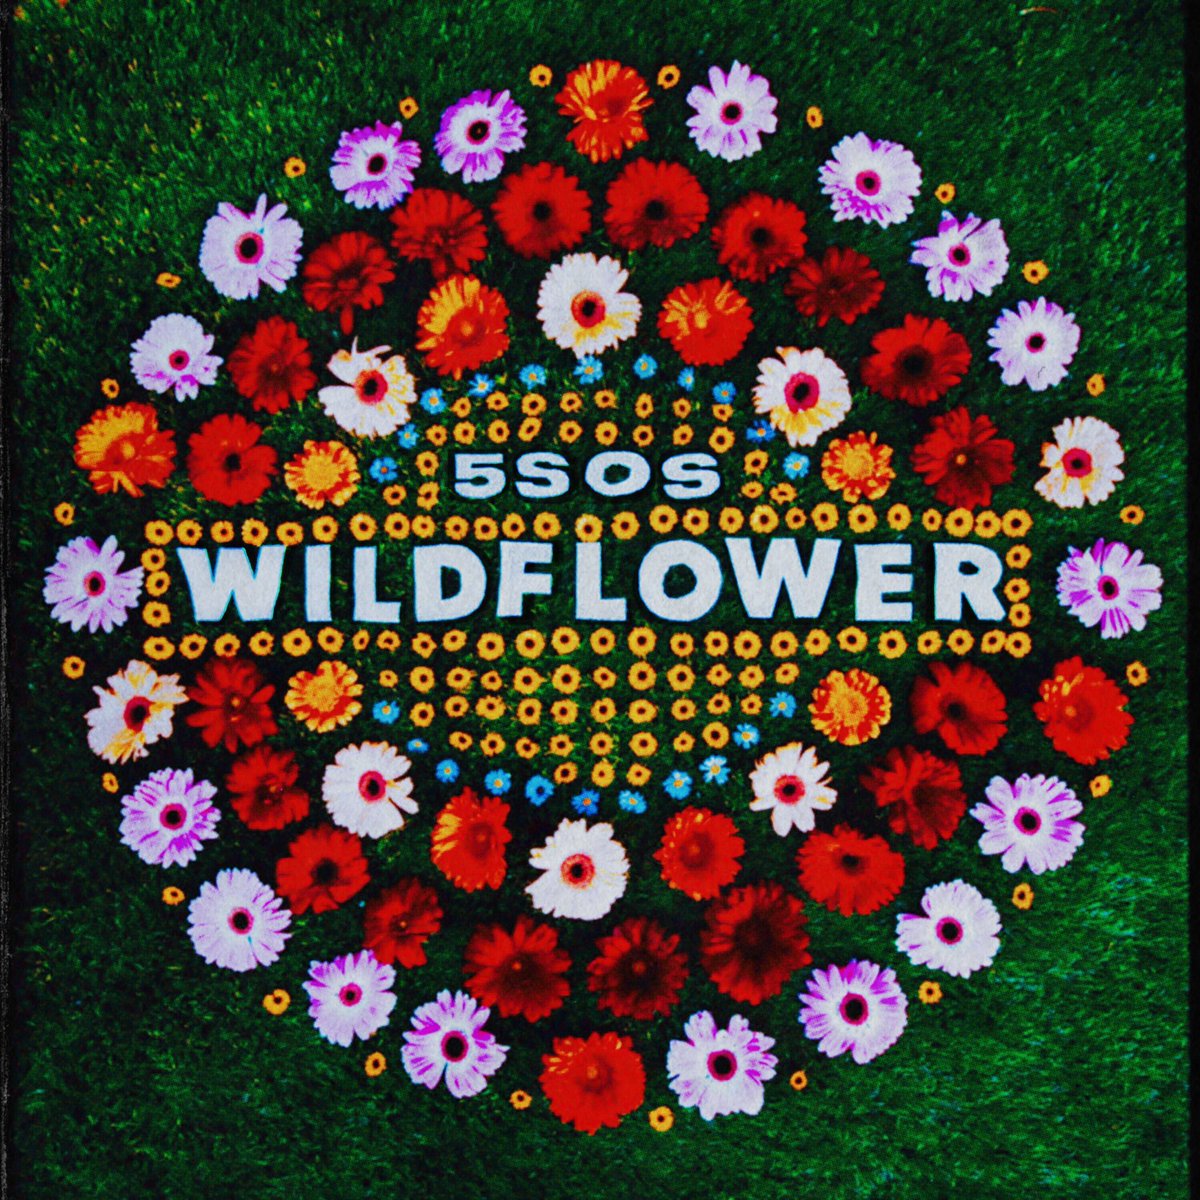 day 32:thought i’d be a bit creative and make my own virtual version of the wildflower cover  @shmandeluca  @5SOS